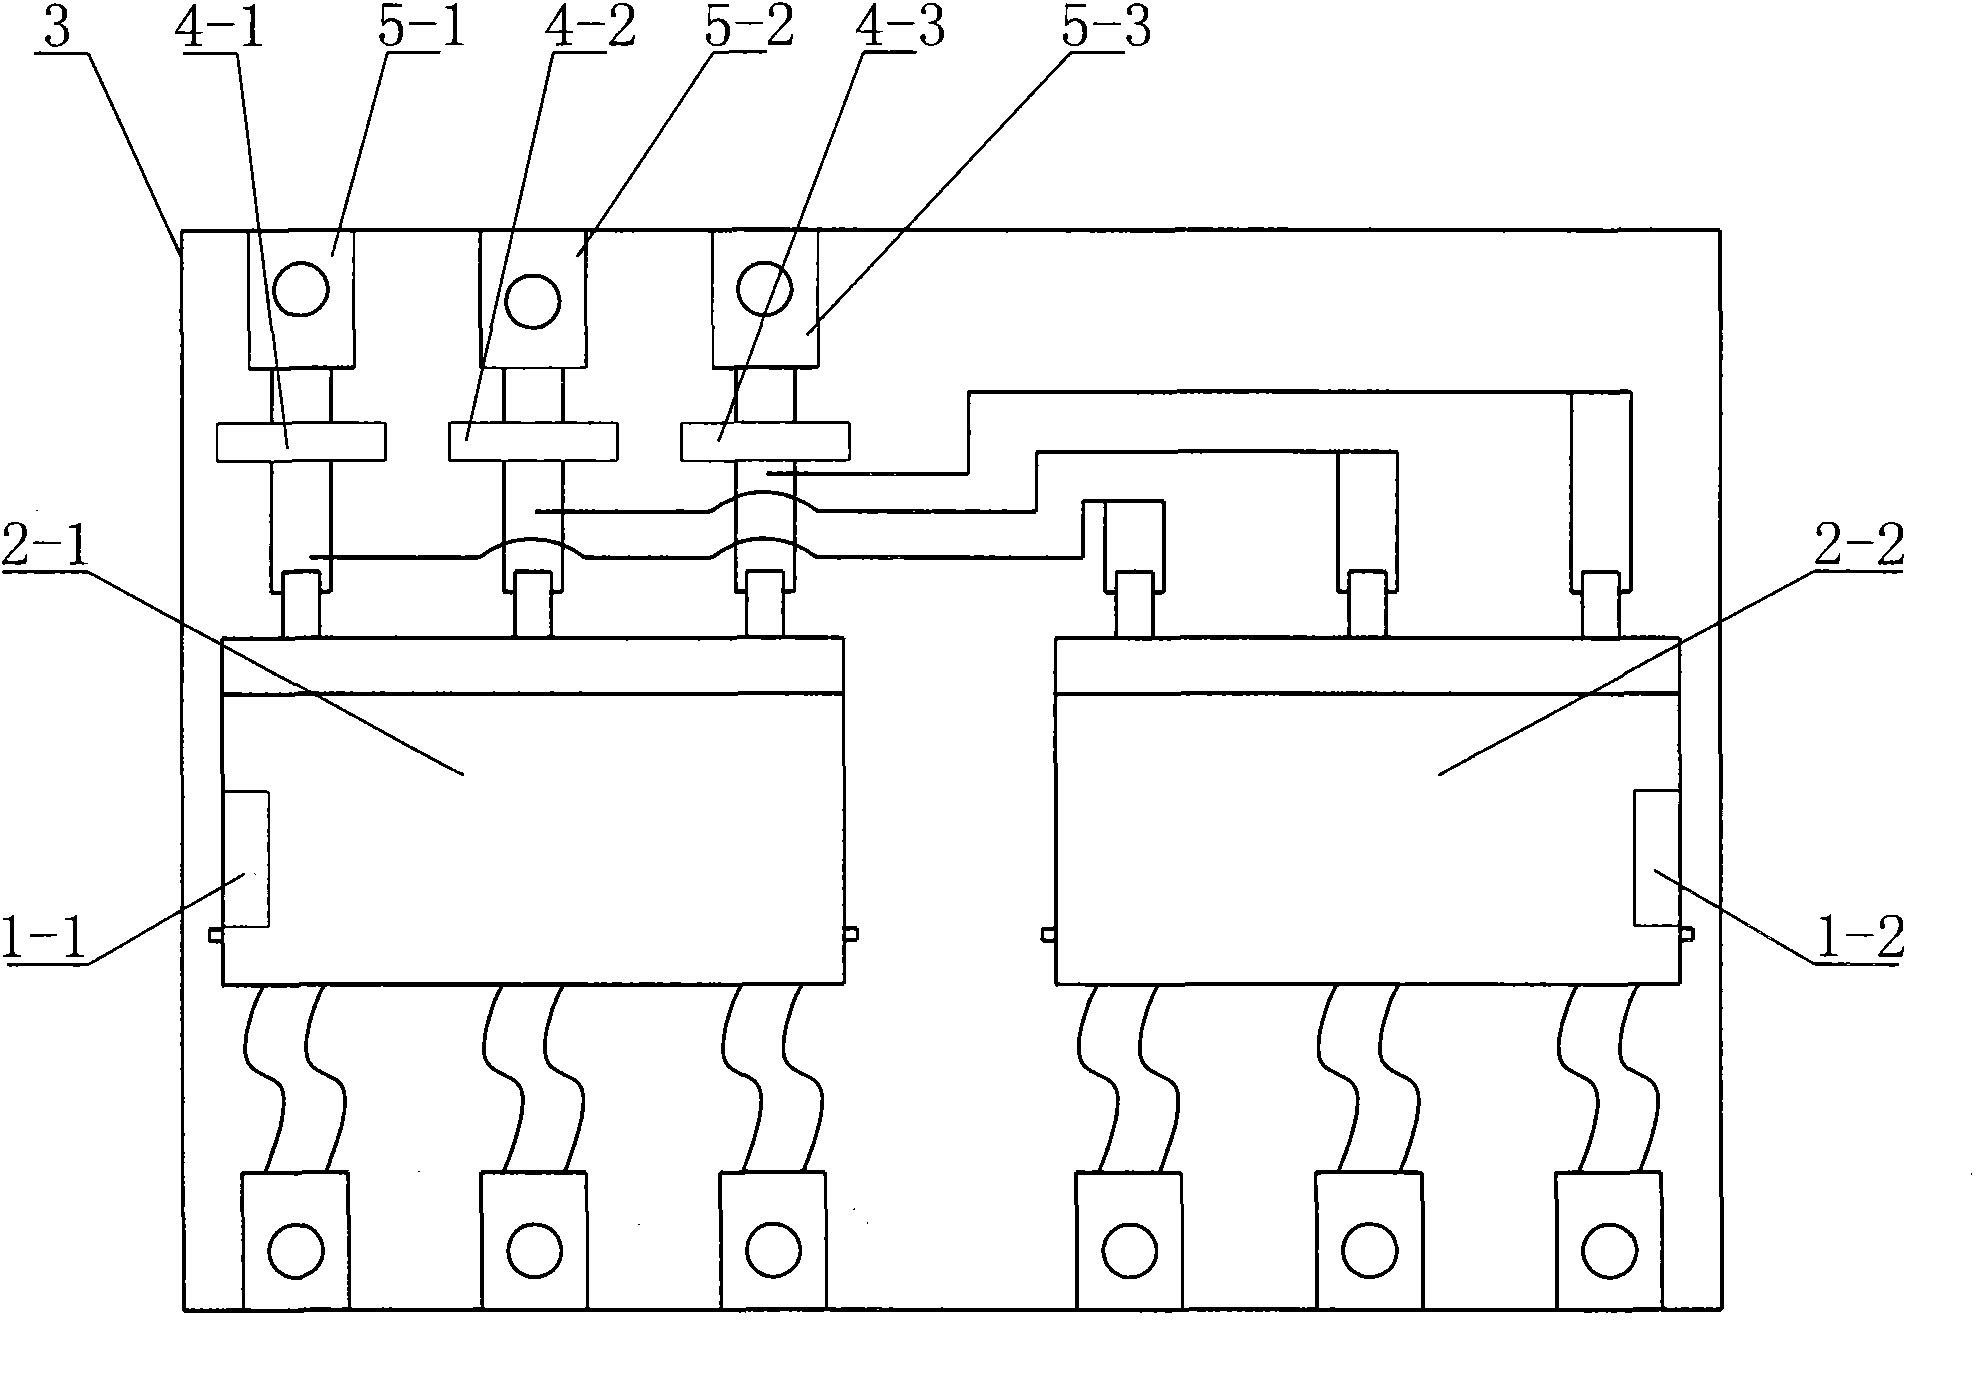 Electromagnetic switch capable of switching delta-shaped and Y-shaped connection modes